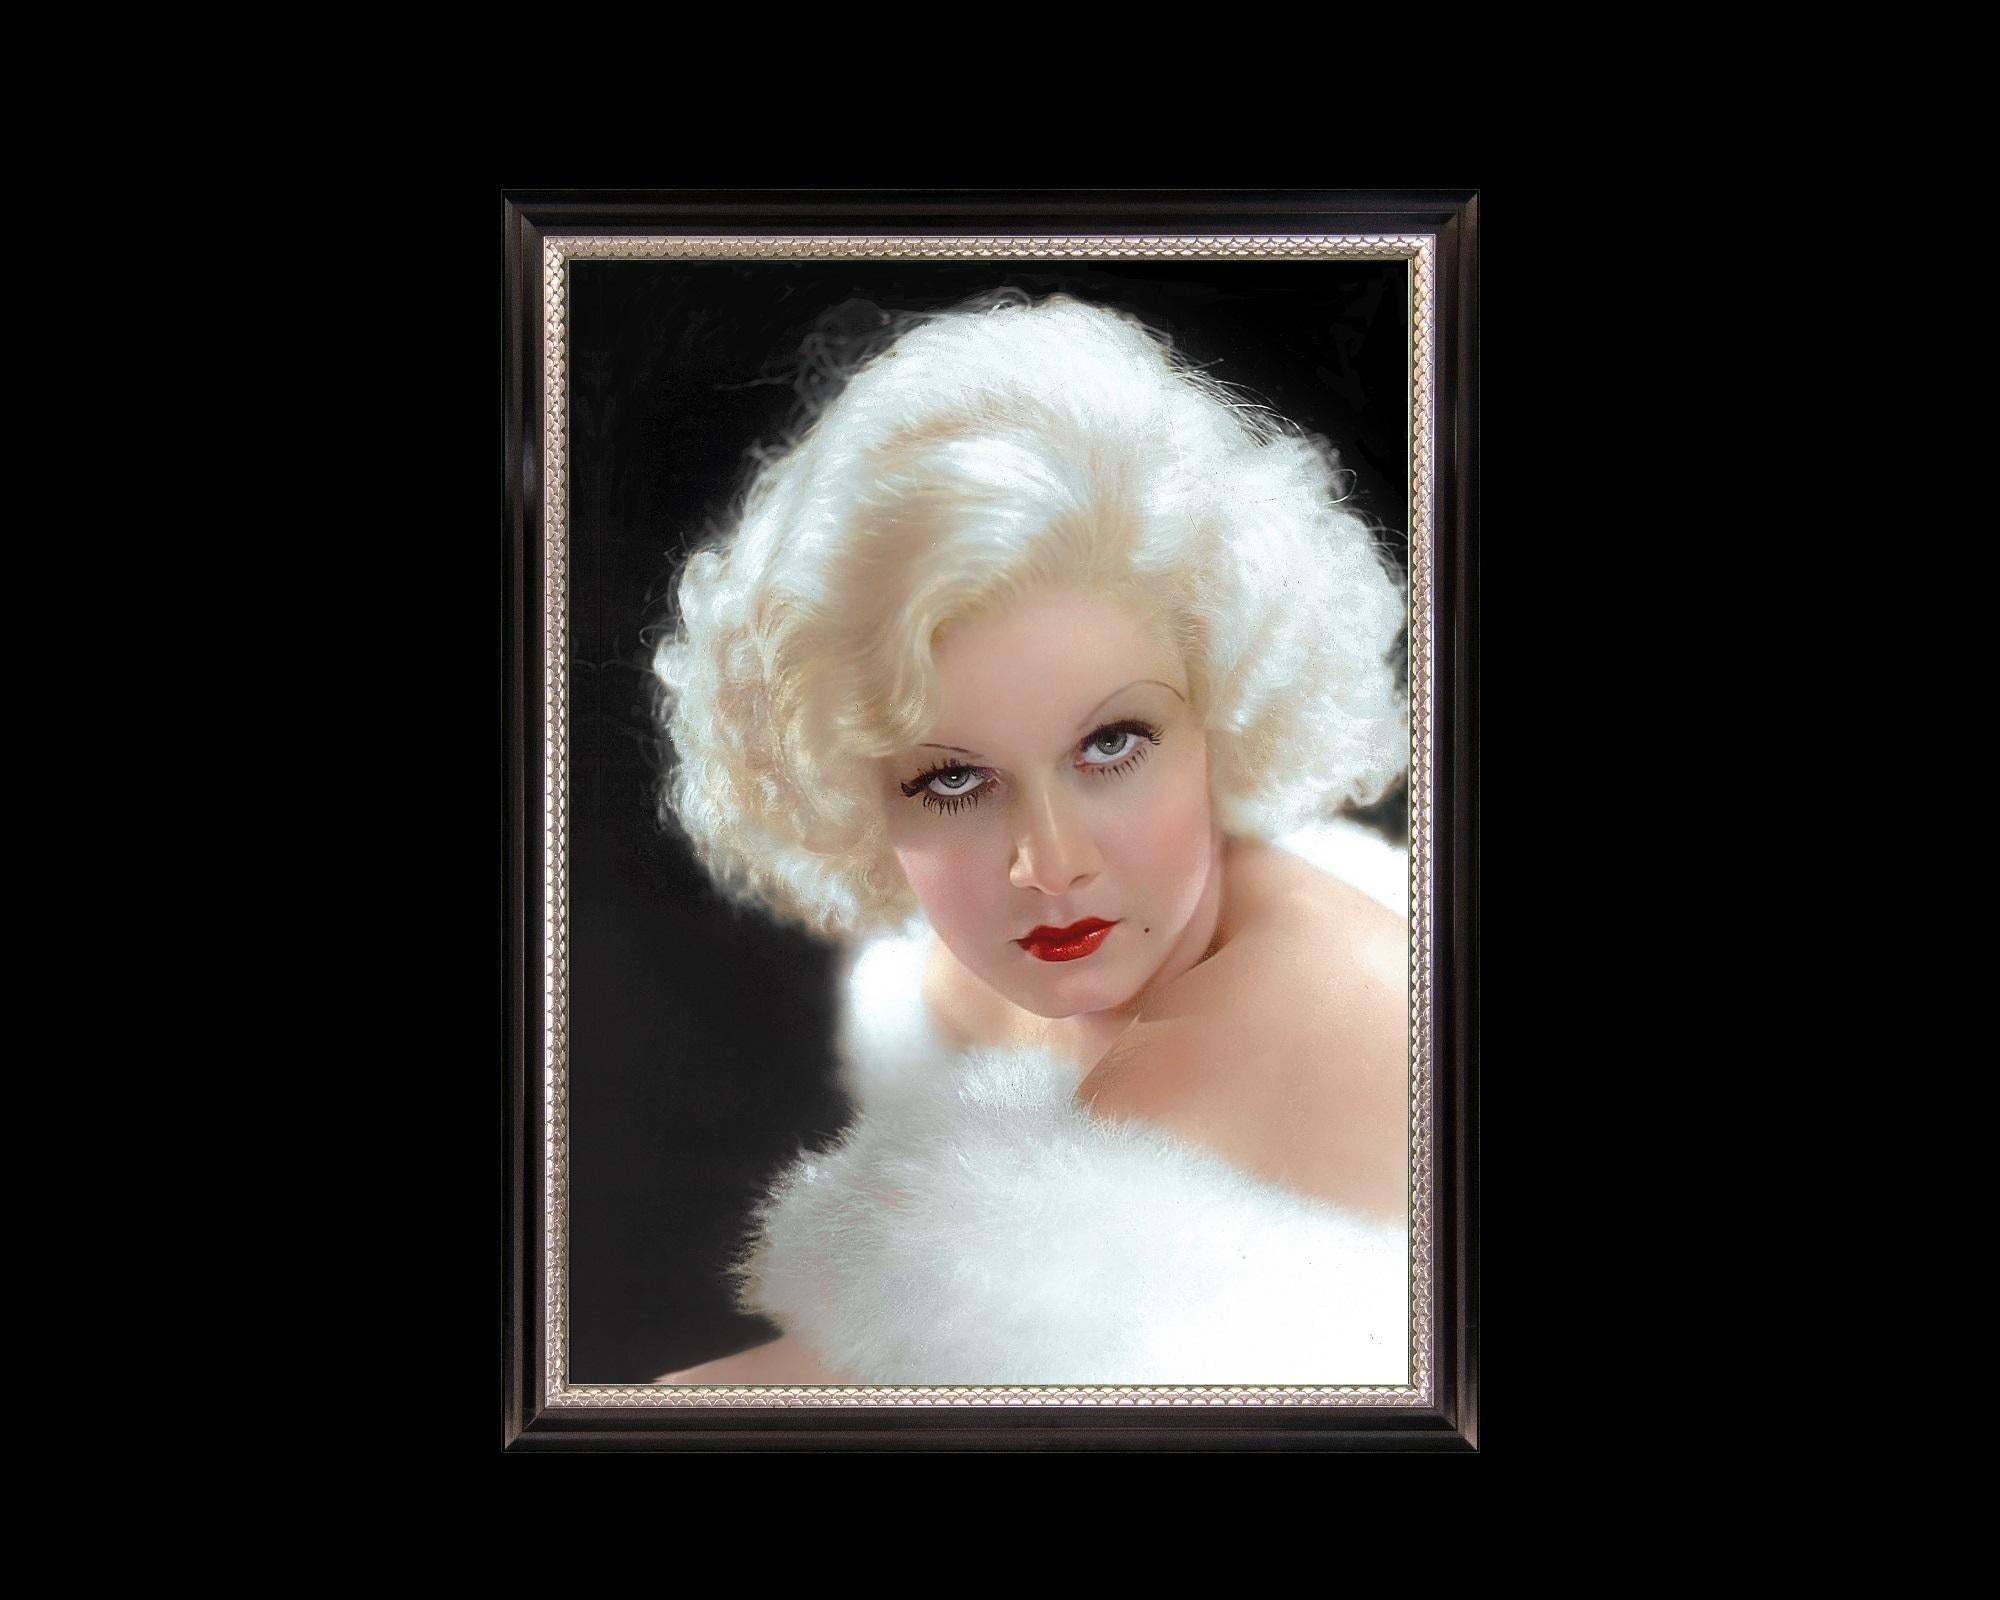 This large Hollywood Regency photograph is a faithful yet nuanced reproduction of the vintage photography portrait of the iconic bombshell 